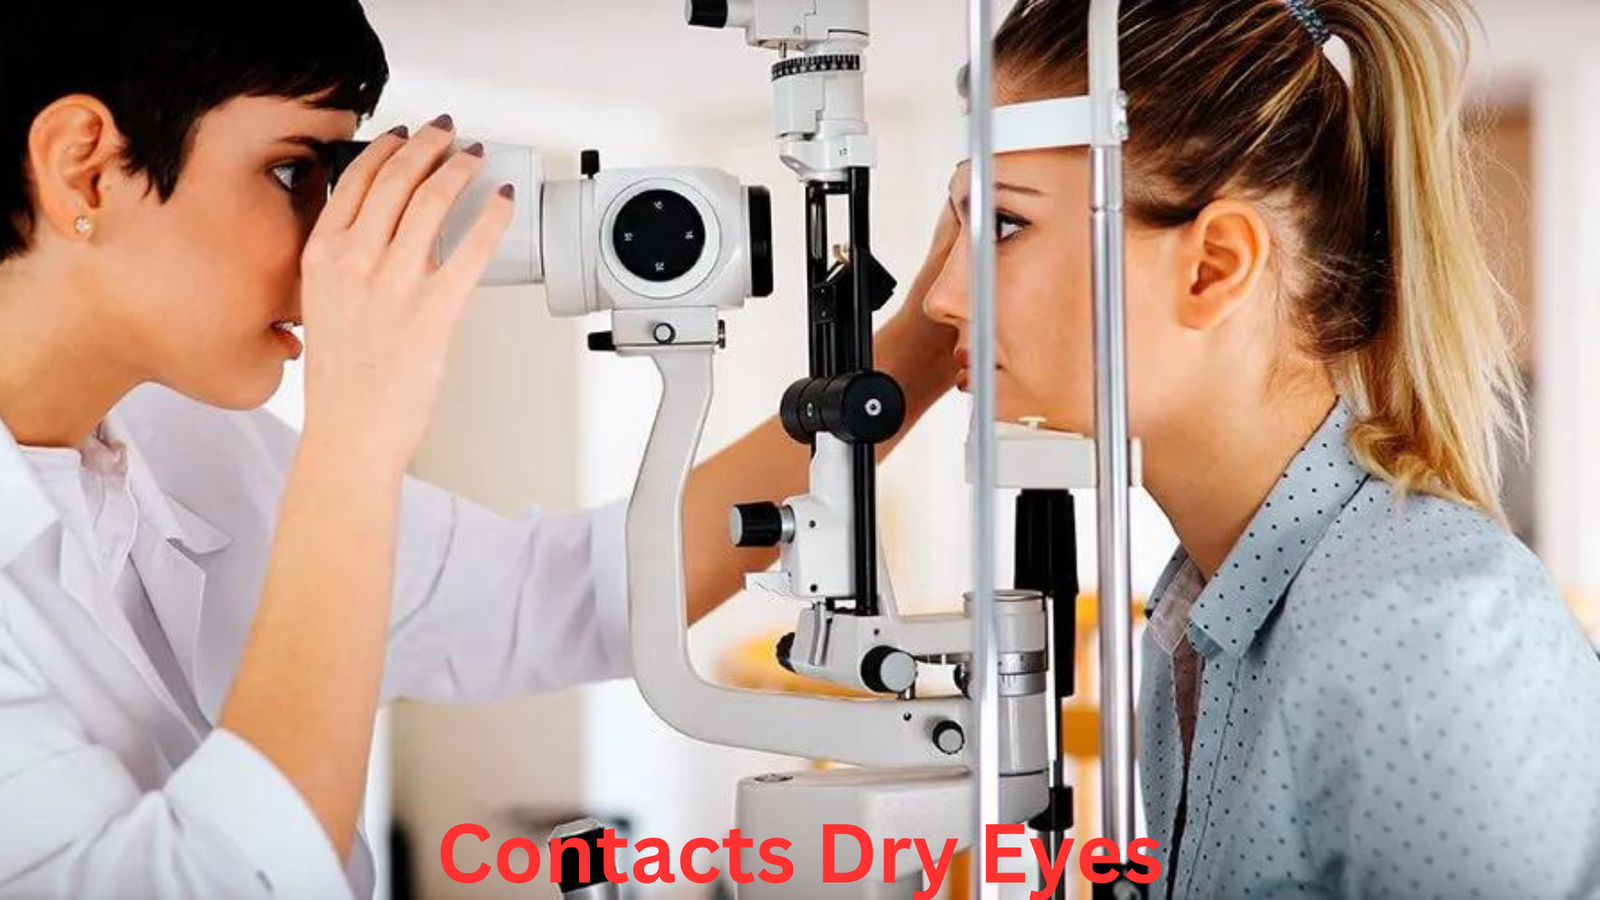  Contacts for Dry Eyes